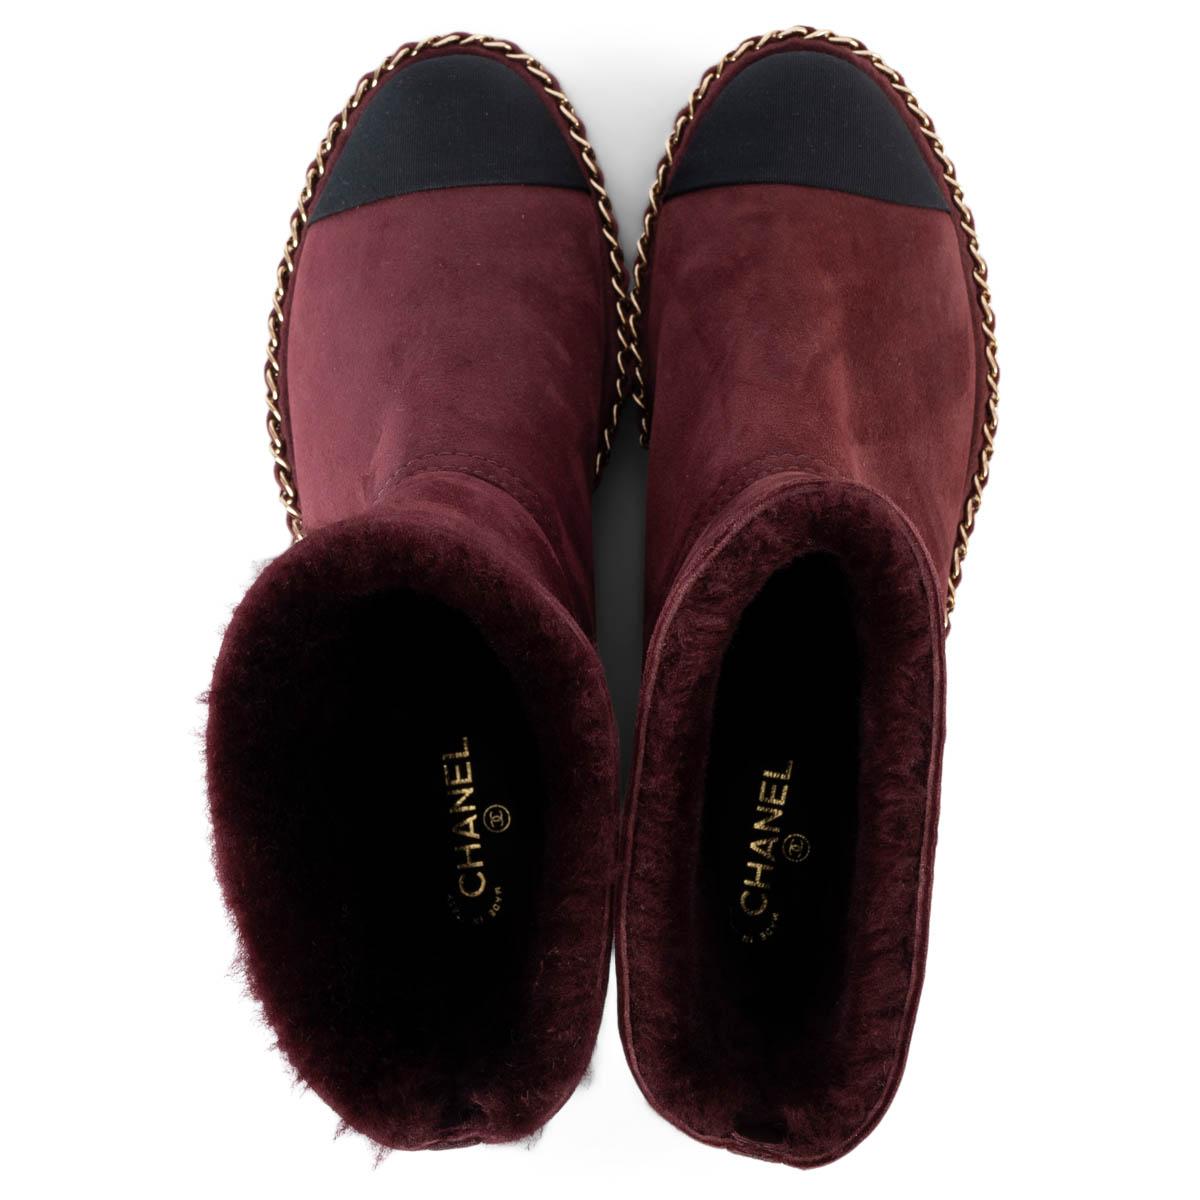 CHANEL burgundy suede 2019 19B SHEARLING LINED Boots Shoes 37 For Sale 2